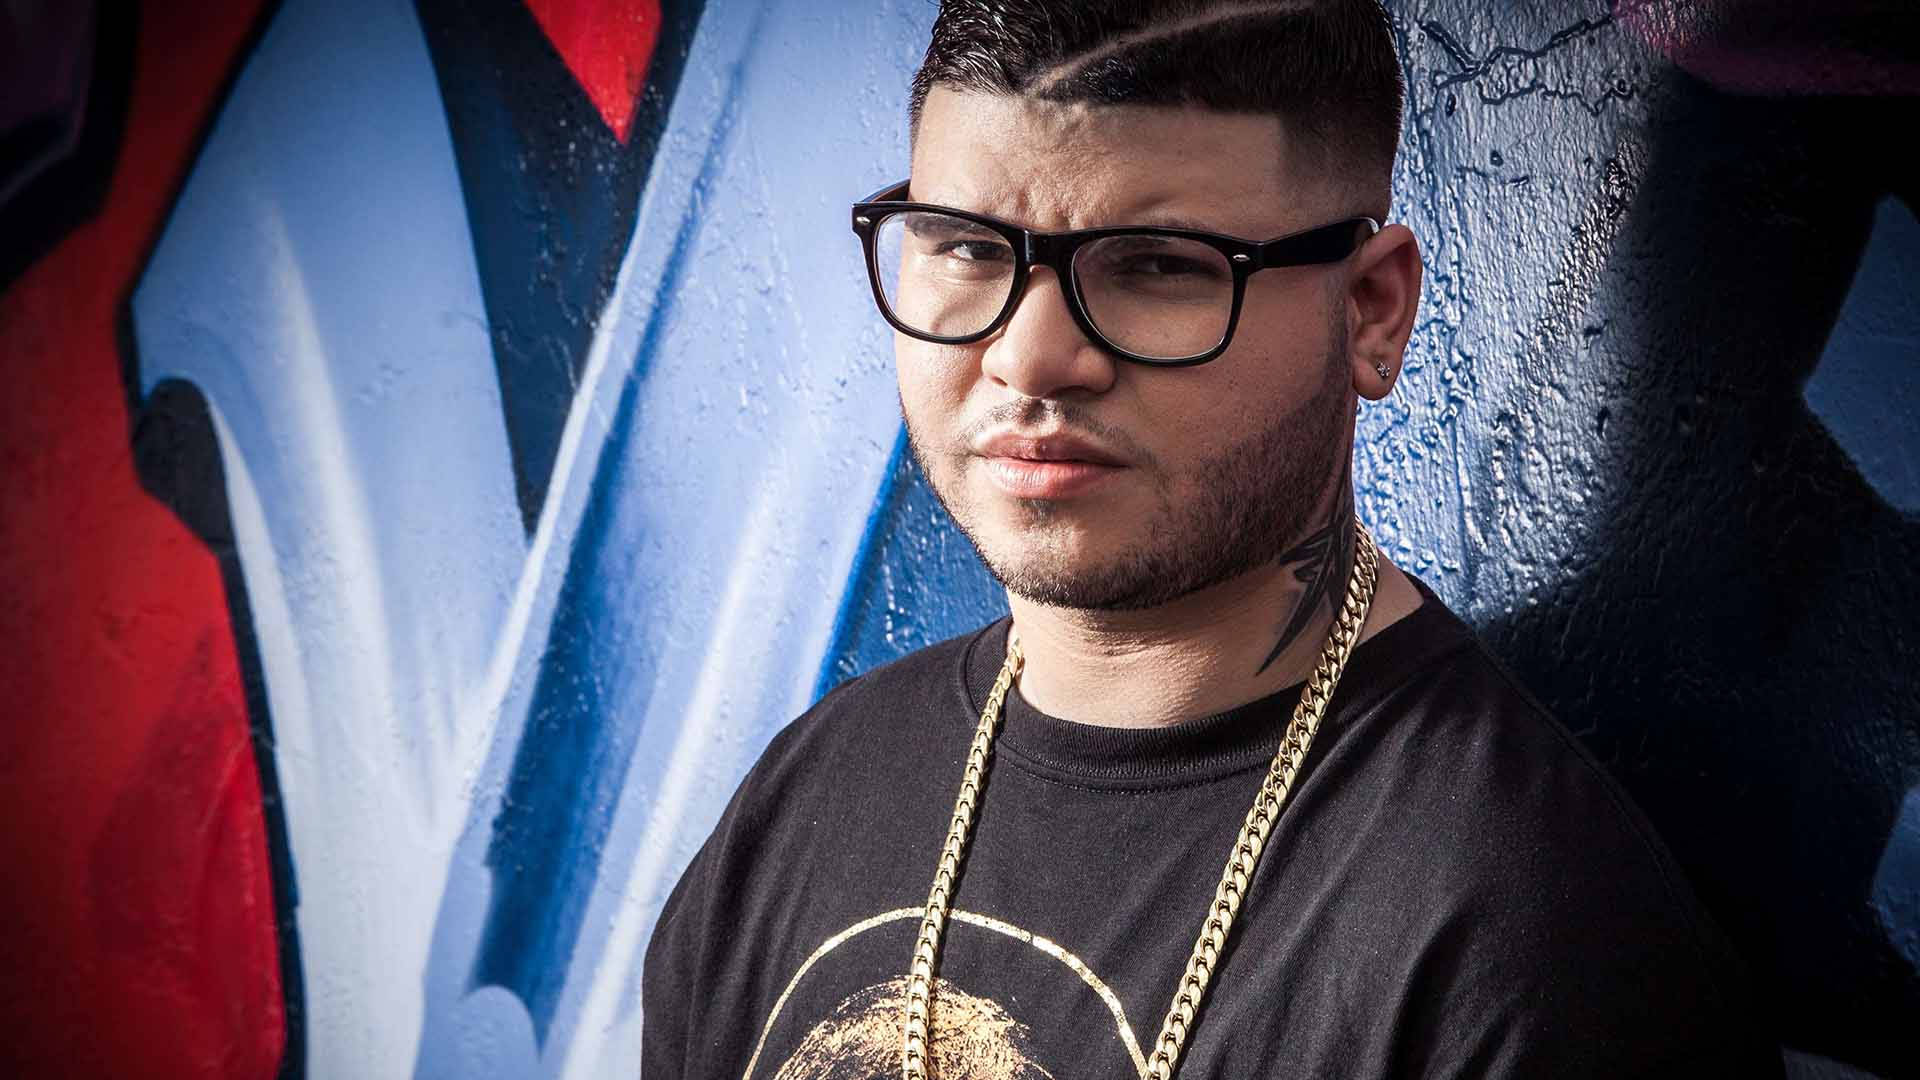 Farruko Leaning On The Wall